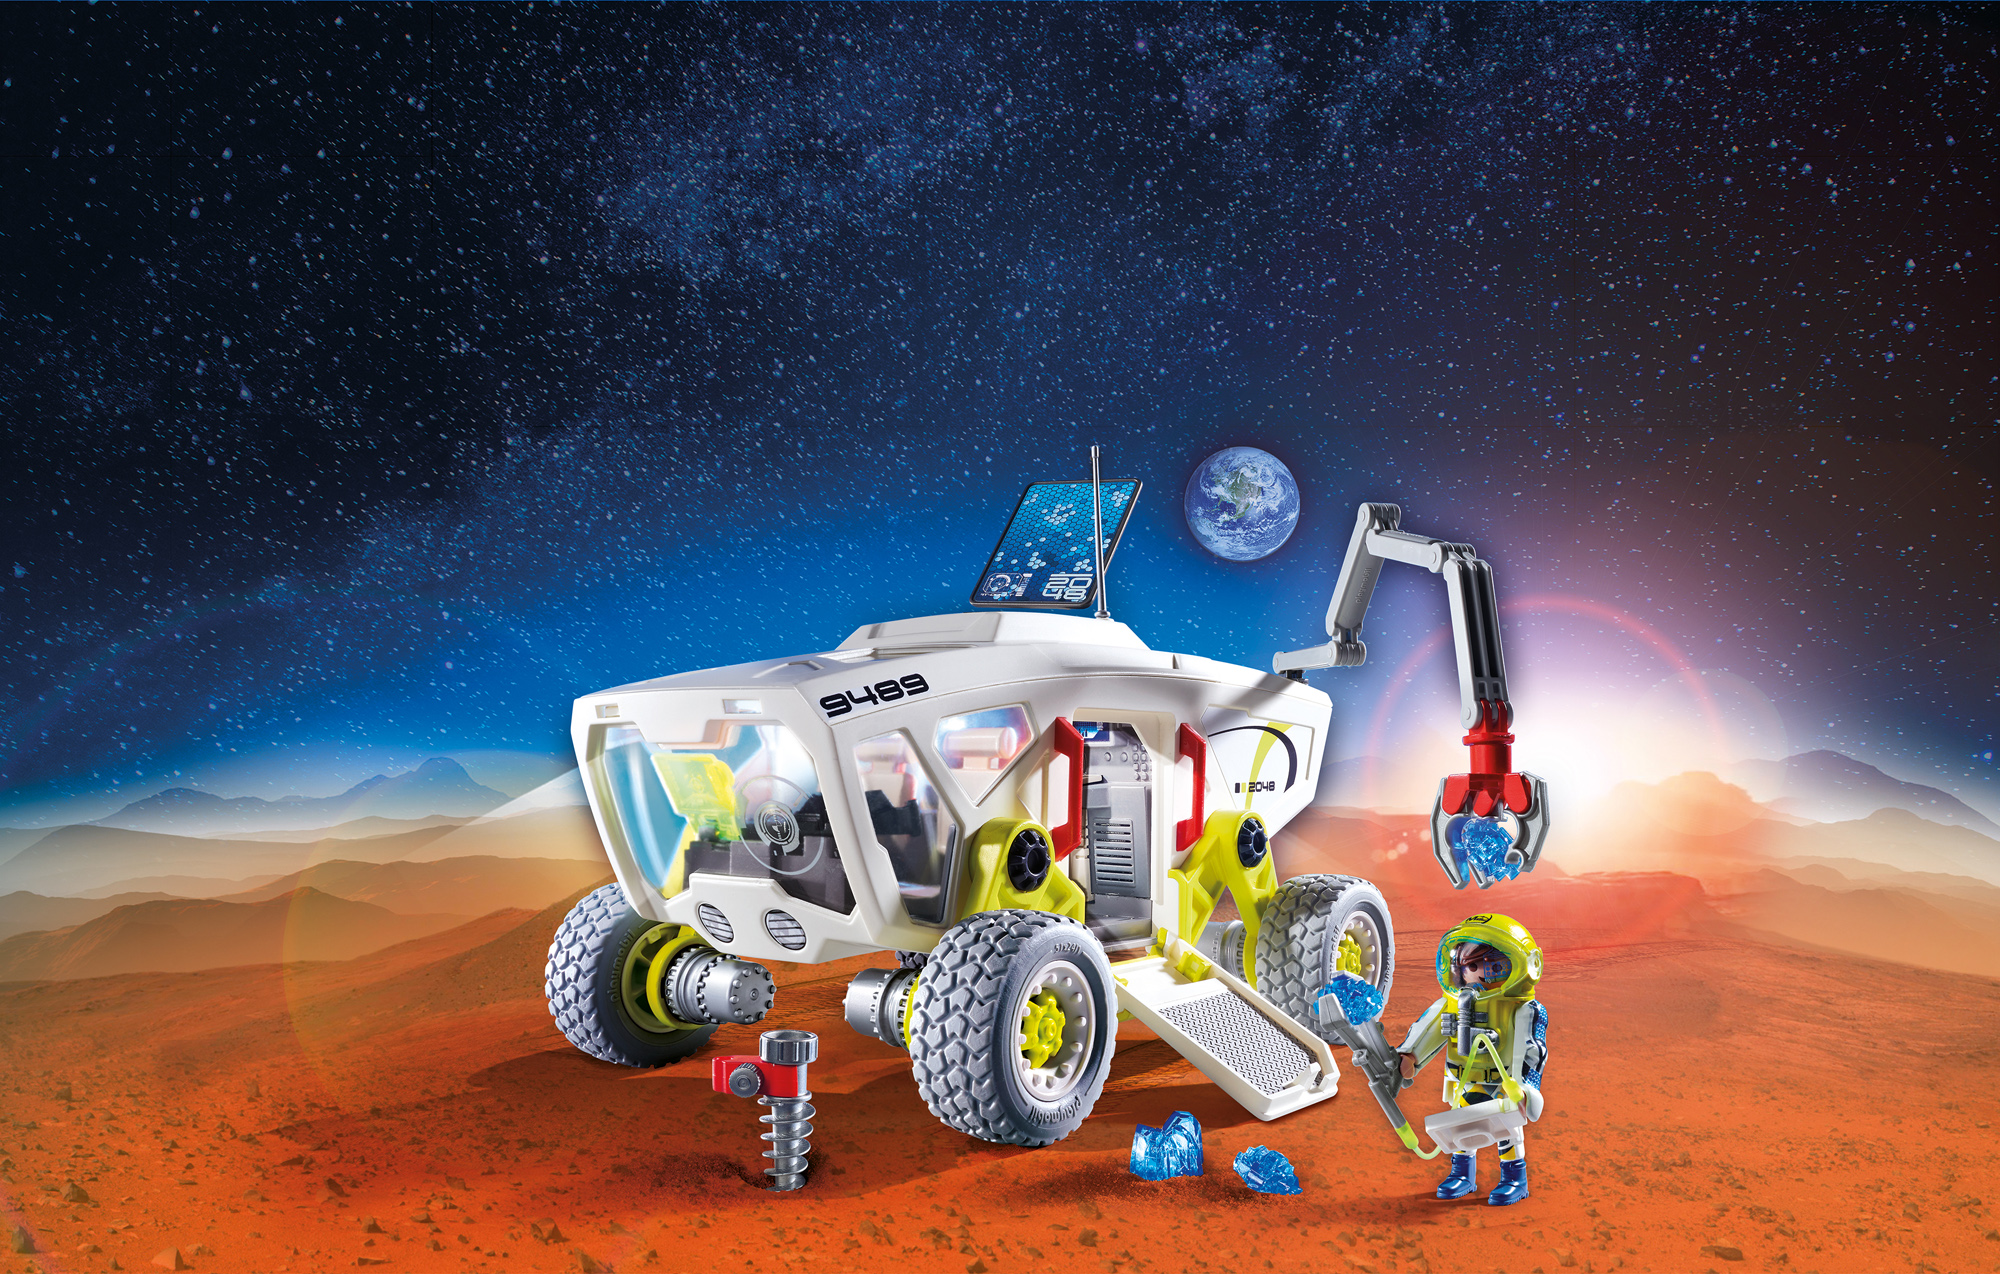 PLAYMOBIL Mars Research Vehicle - image 4 of 7